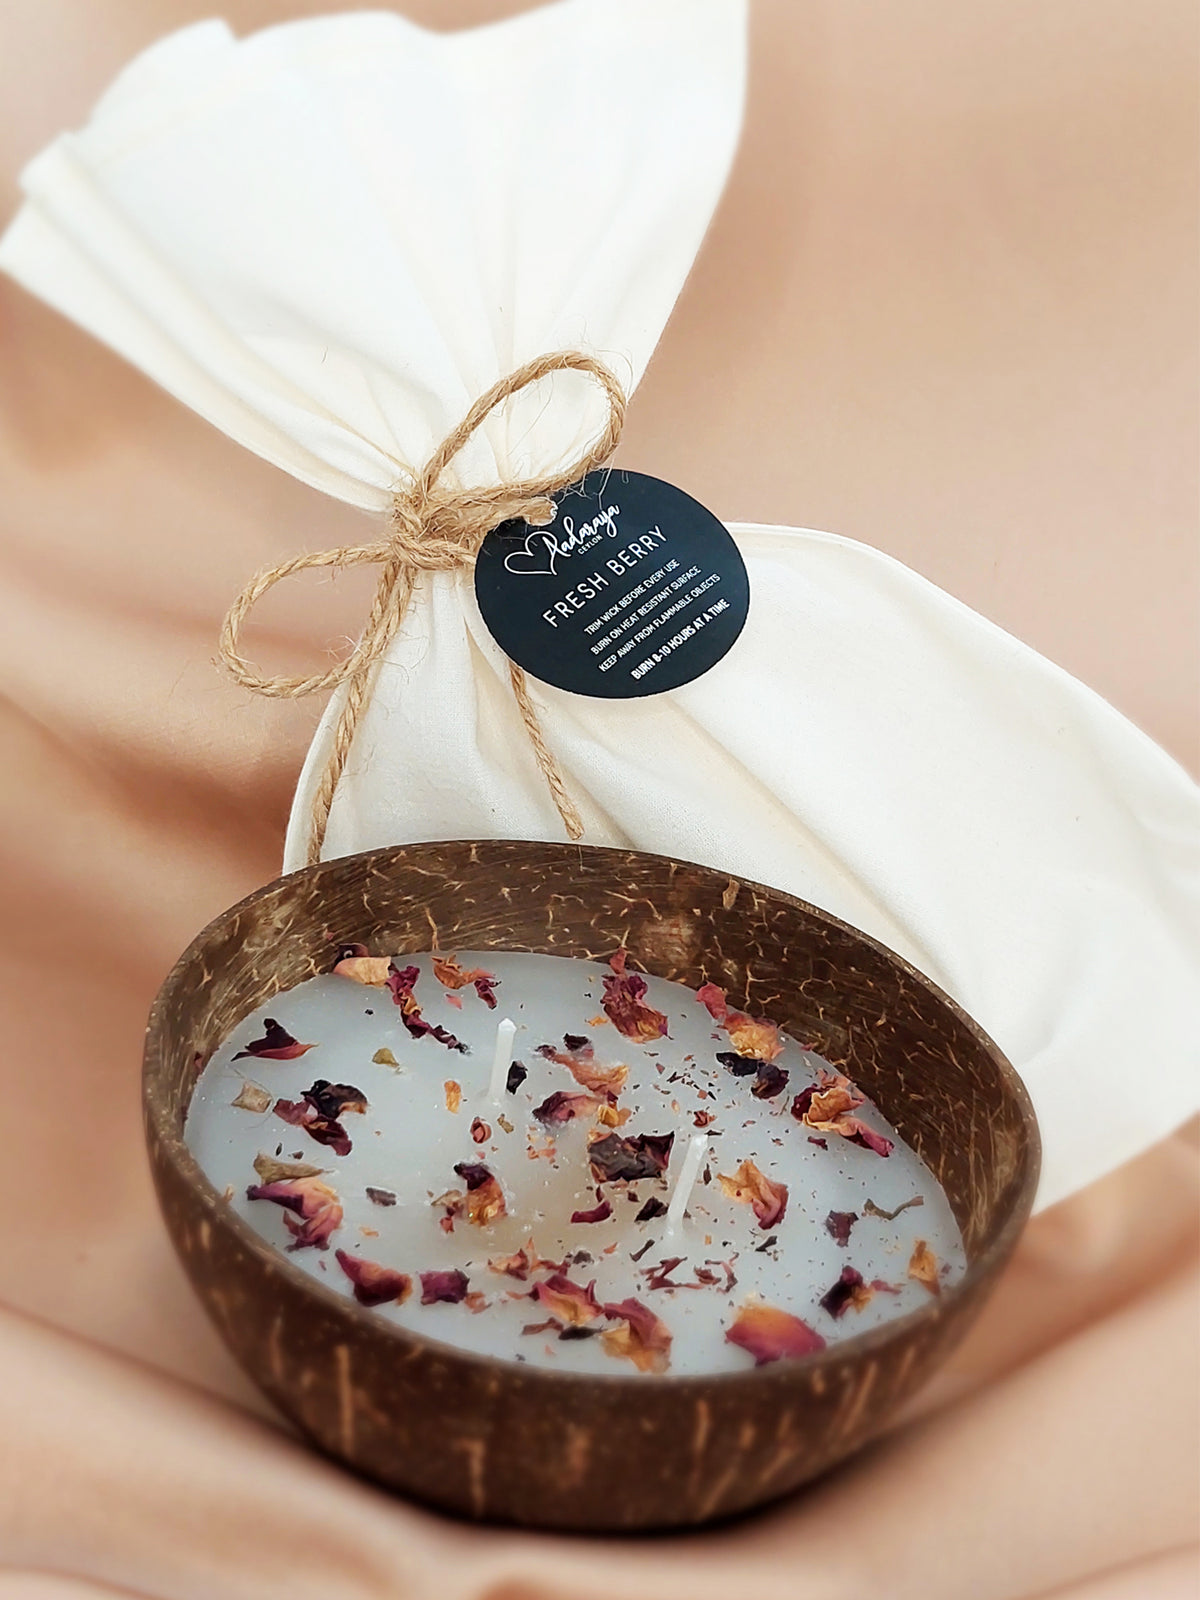 Serene - Coconut Shell Candle in Cinnamon, Rose or Fresh Berry